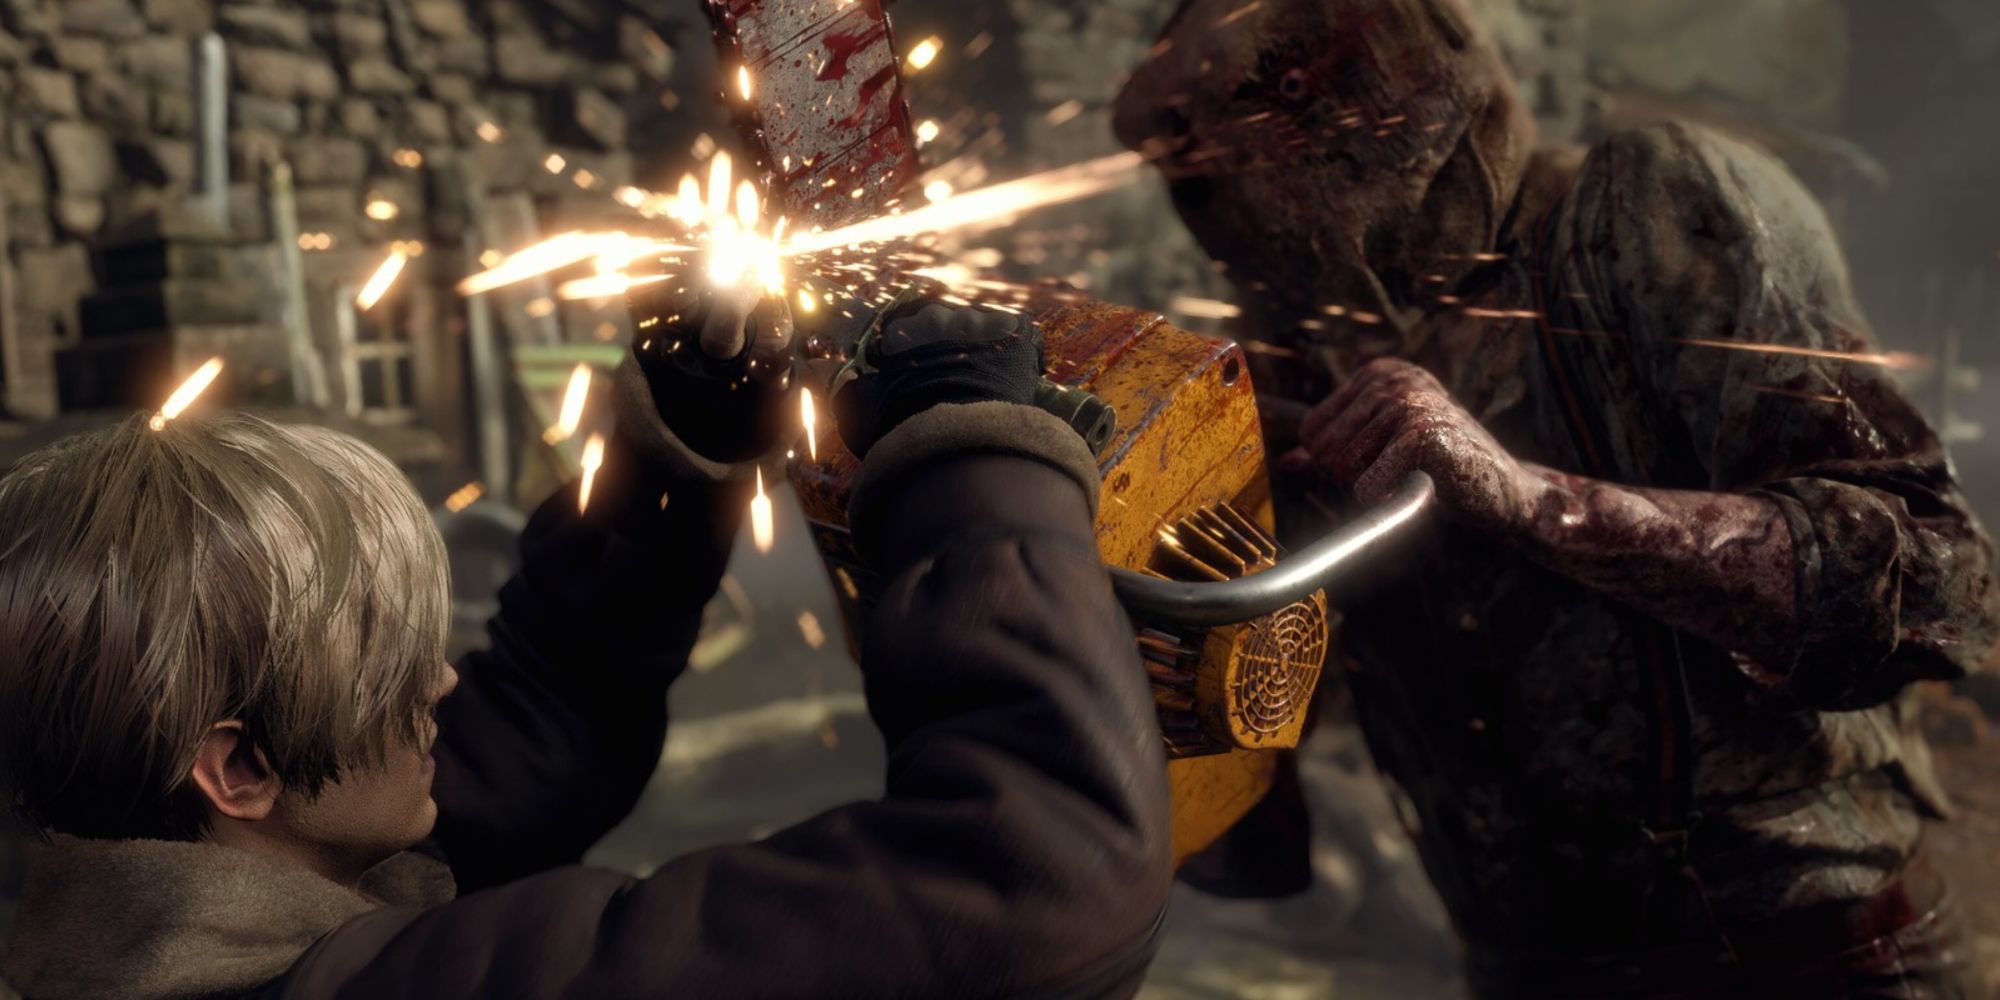 Leon parries a chainsaw with a gun in Resident Evil 4 Remake